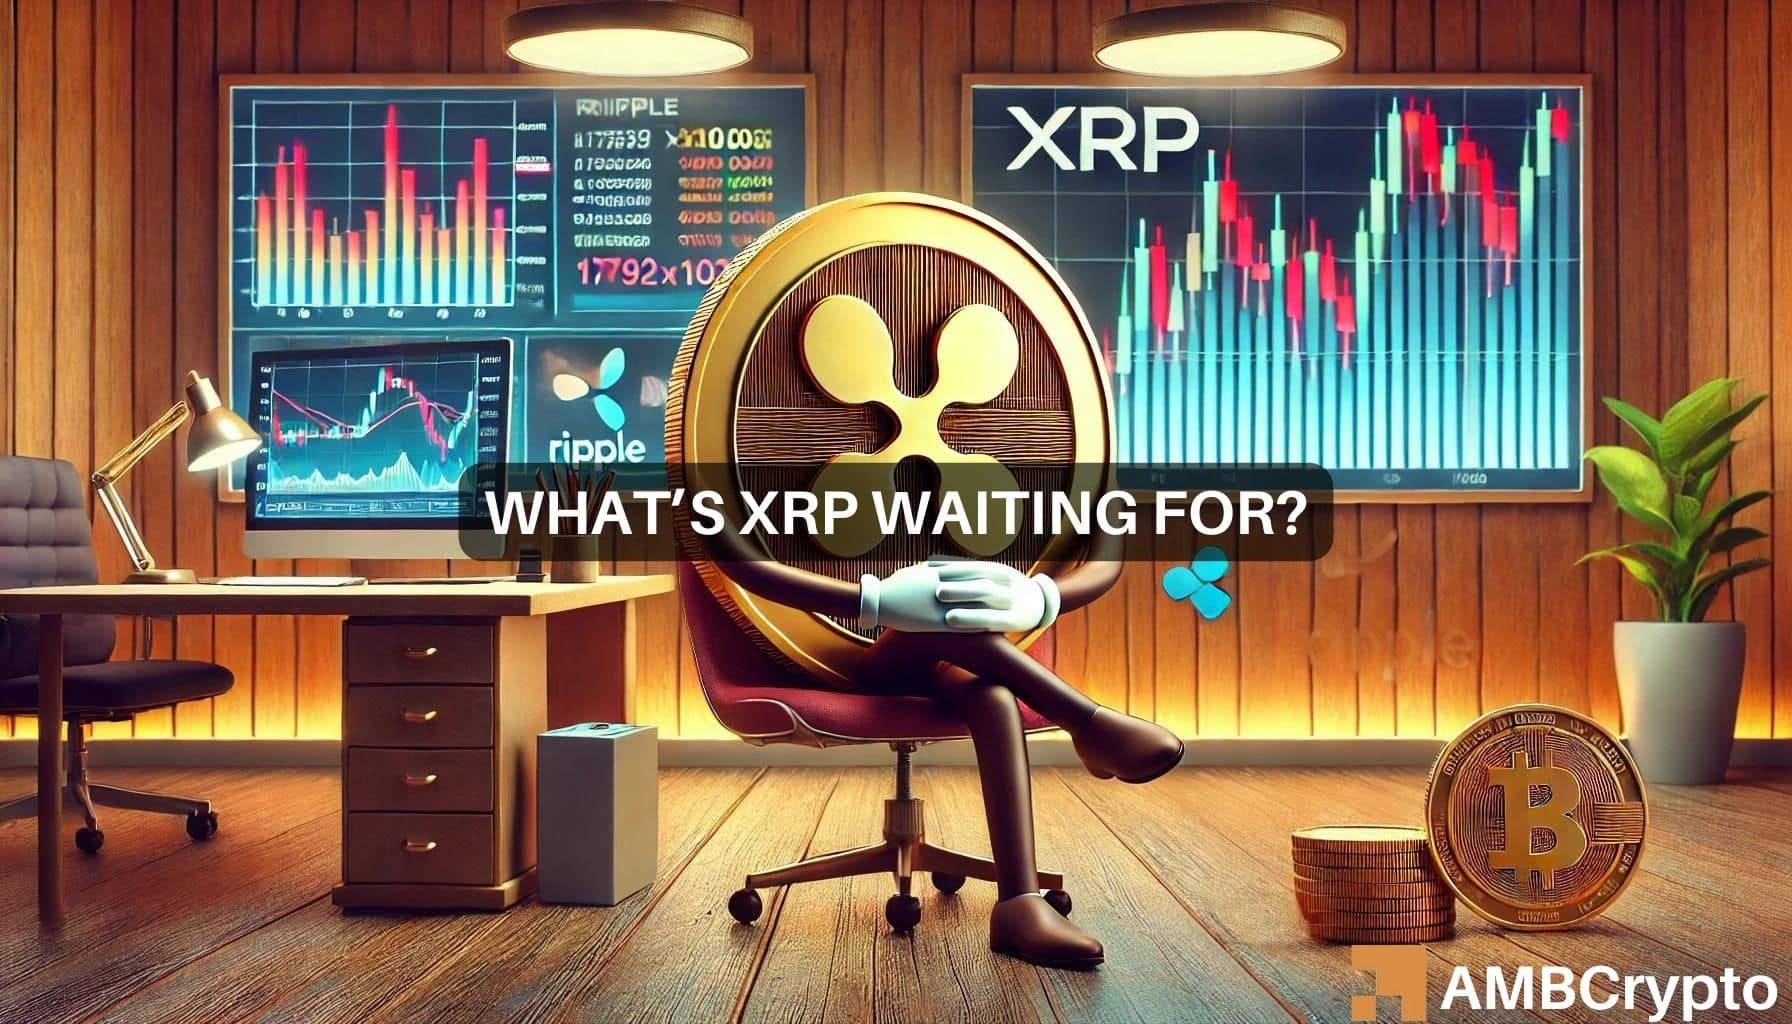 XRP price struggles, but the altcoin is waiting for a breakout